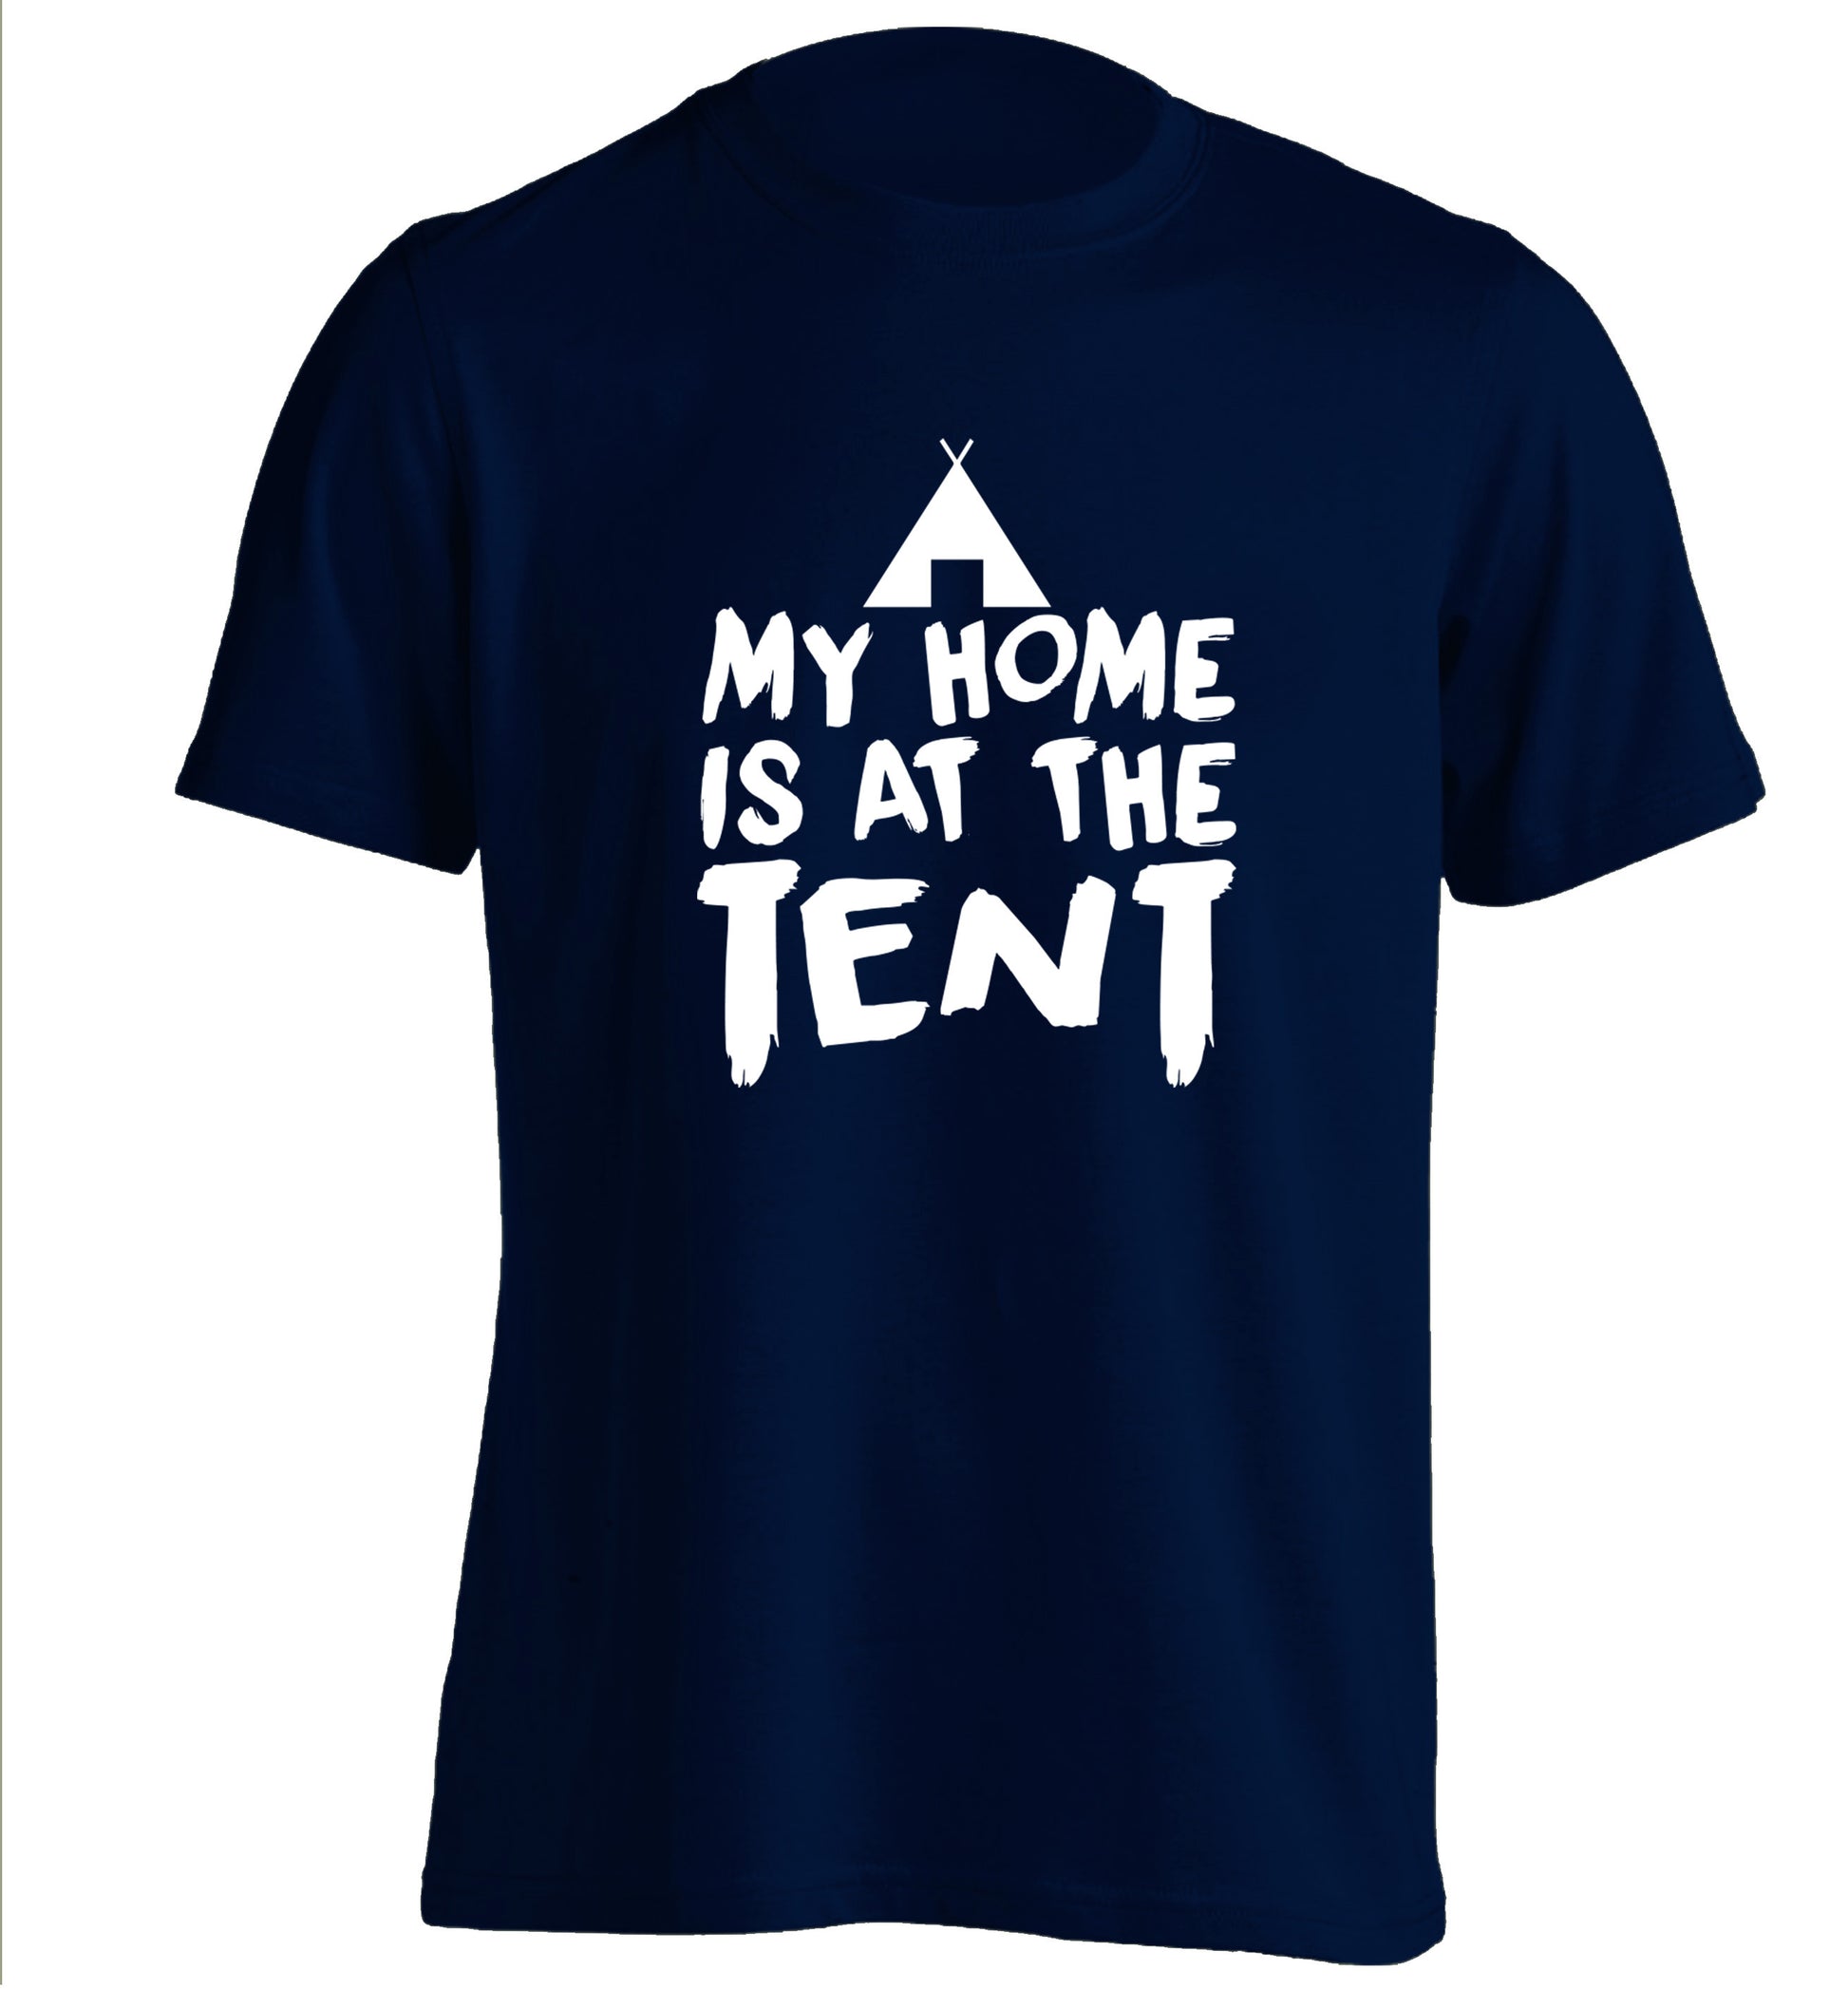 My home is at the tent adults unisex navy Tshirt 2XL